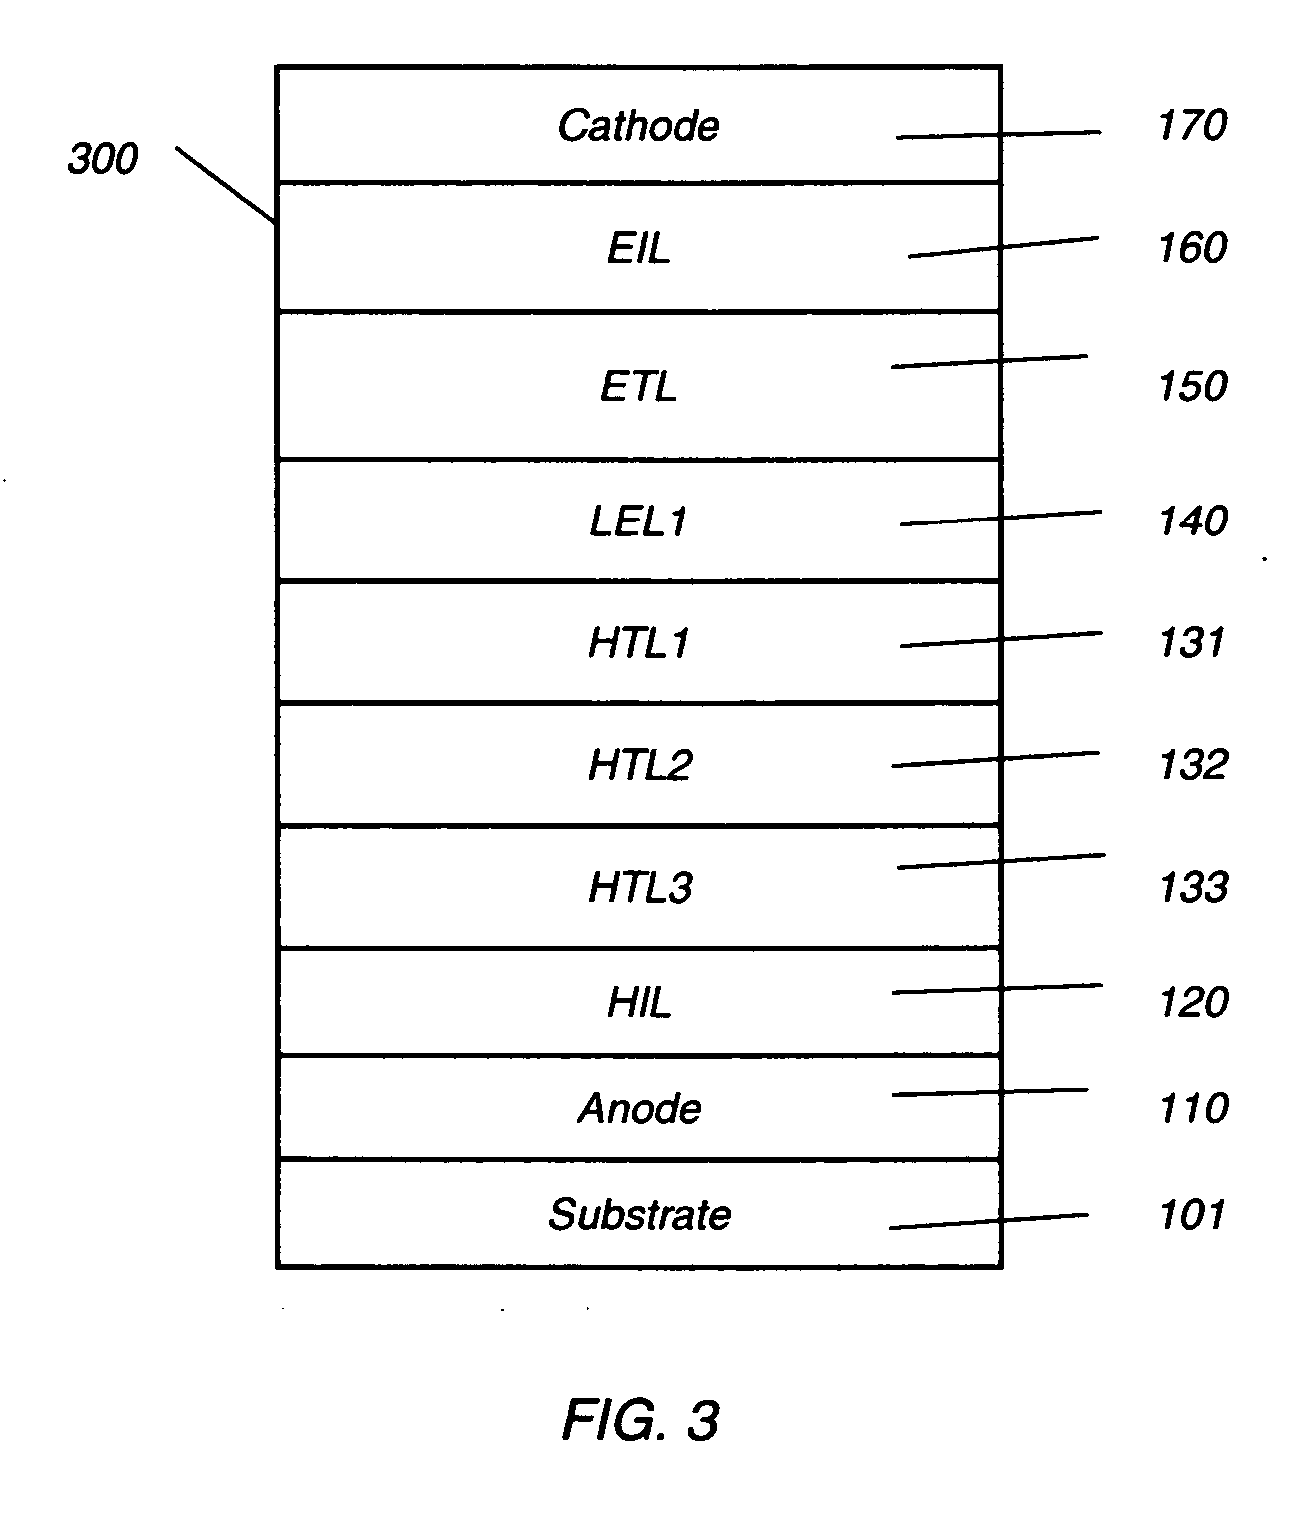 OLED device with improved efficiency and lifetime